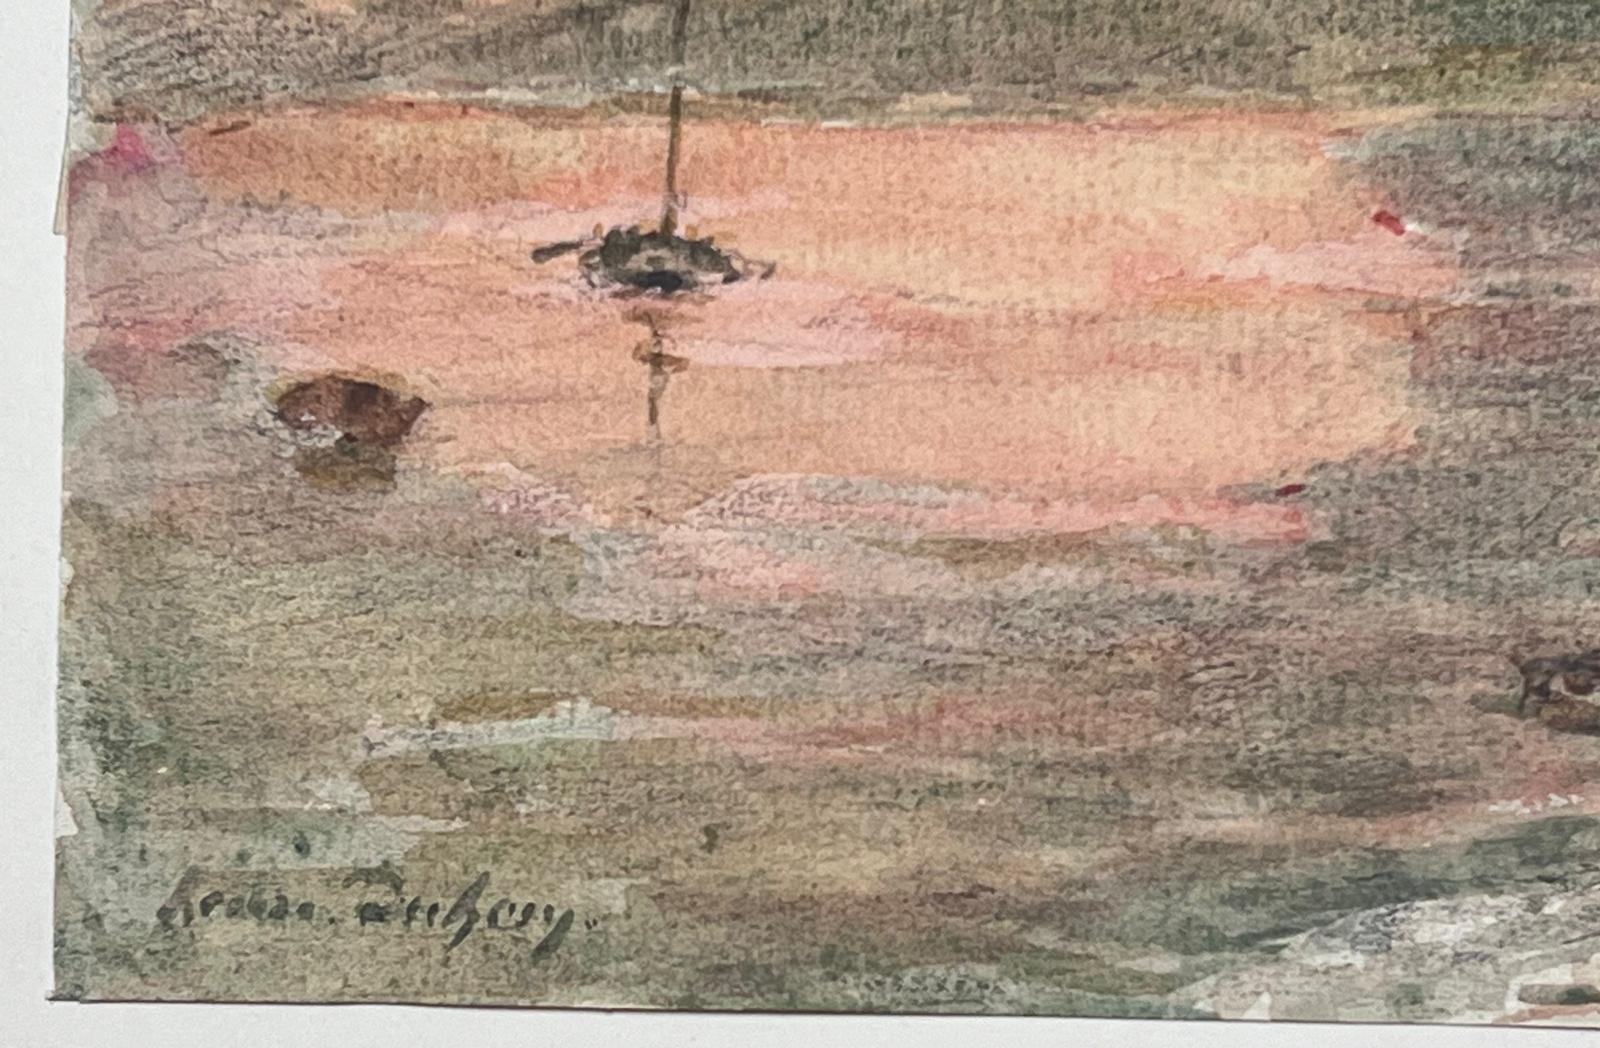 The artist: 
Henri Aime Duhem (1860-1941) French *see notes below, signed 

Title: Sunset at Sea

Medium:  
signed gouache on paper, loosely laid over card, unframed

card: 10 x 12.75 inches
painting: 5 x 6.5 inches

Provenance: 
private collection